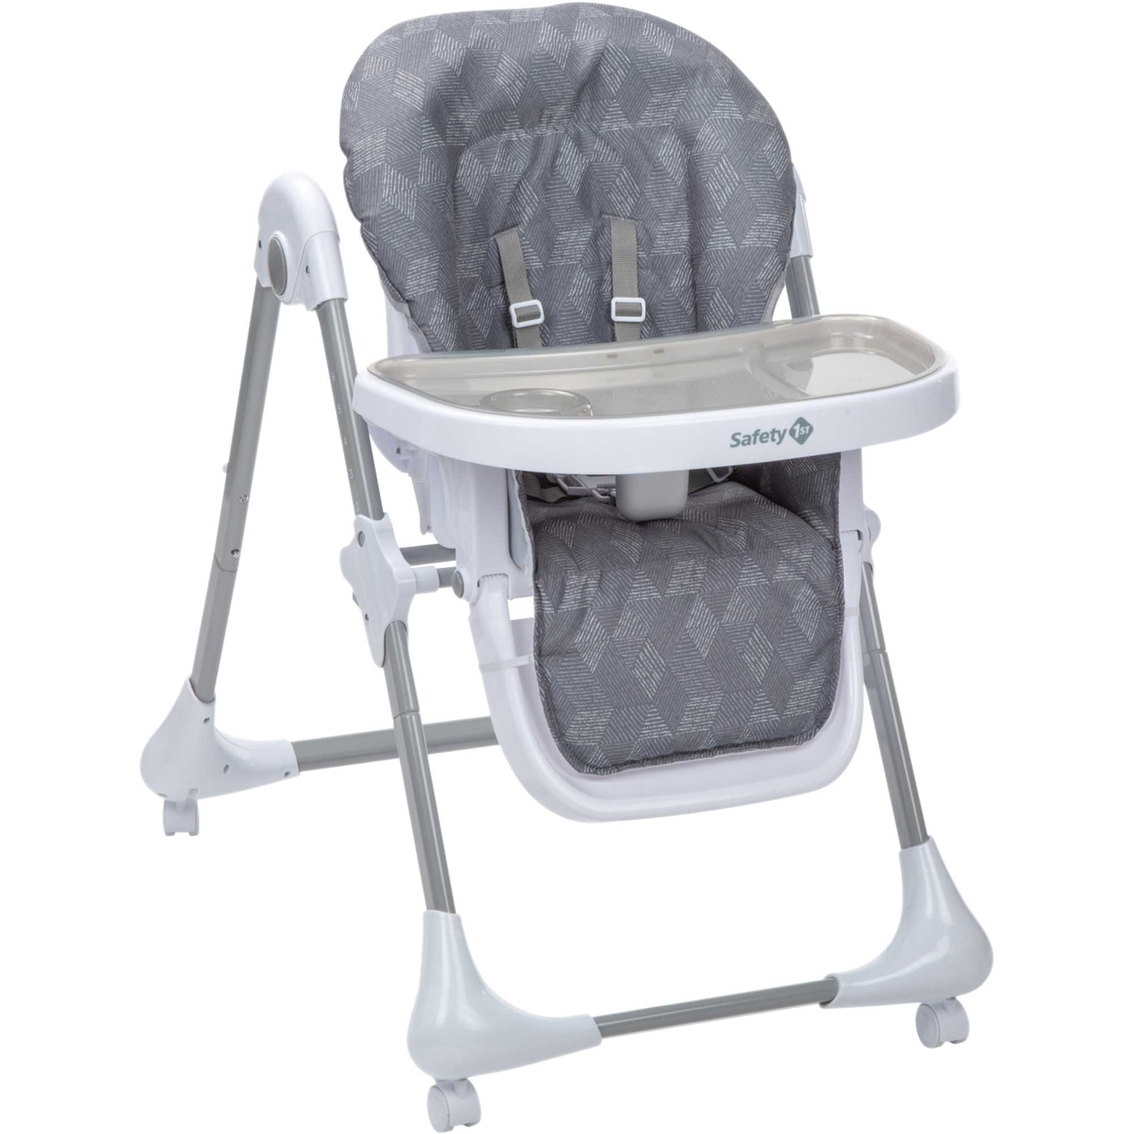 Safety 1st 3-in-1 Grow and Go High Chair - Image 3 of 6